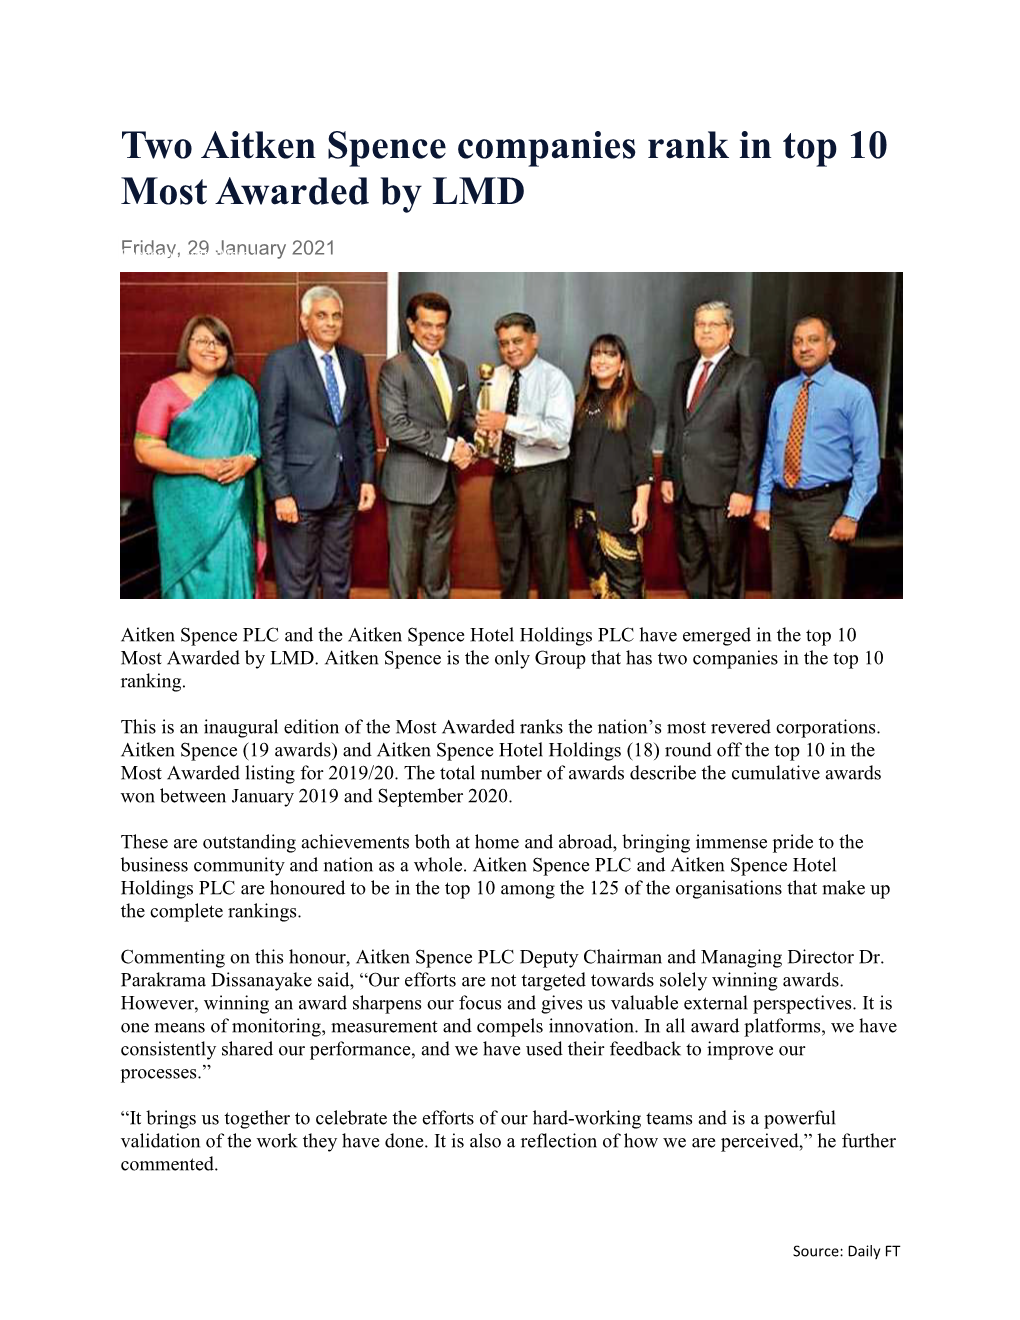 Two Aitken Spence Companies Rank in Top 10 Most Awarded by LMD